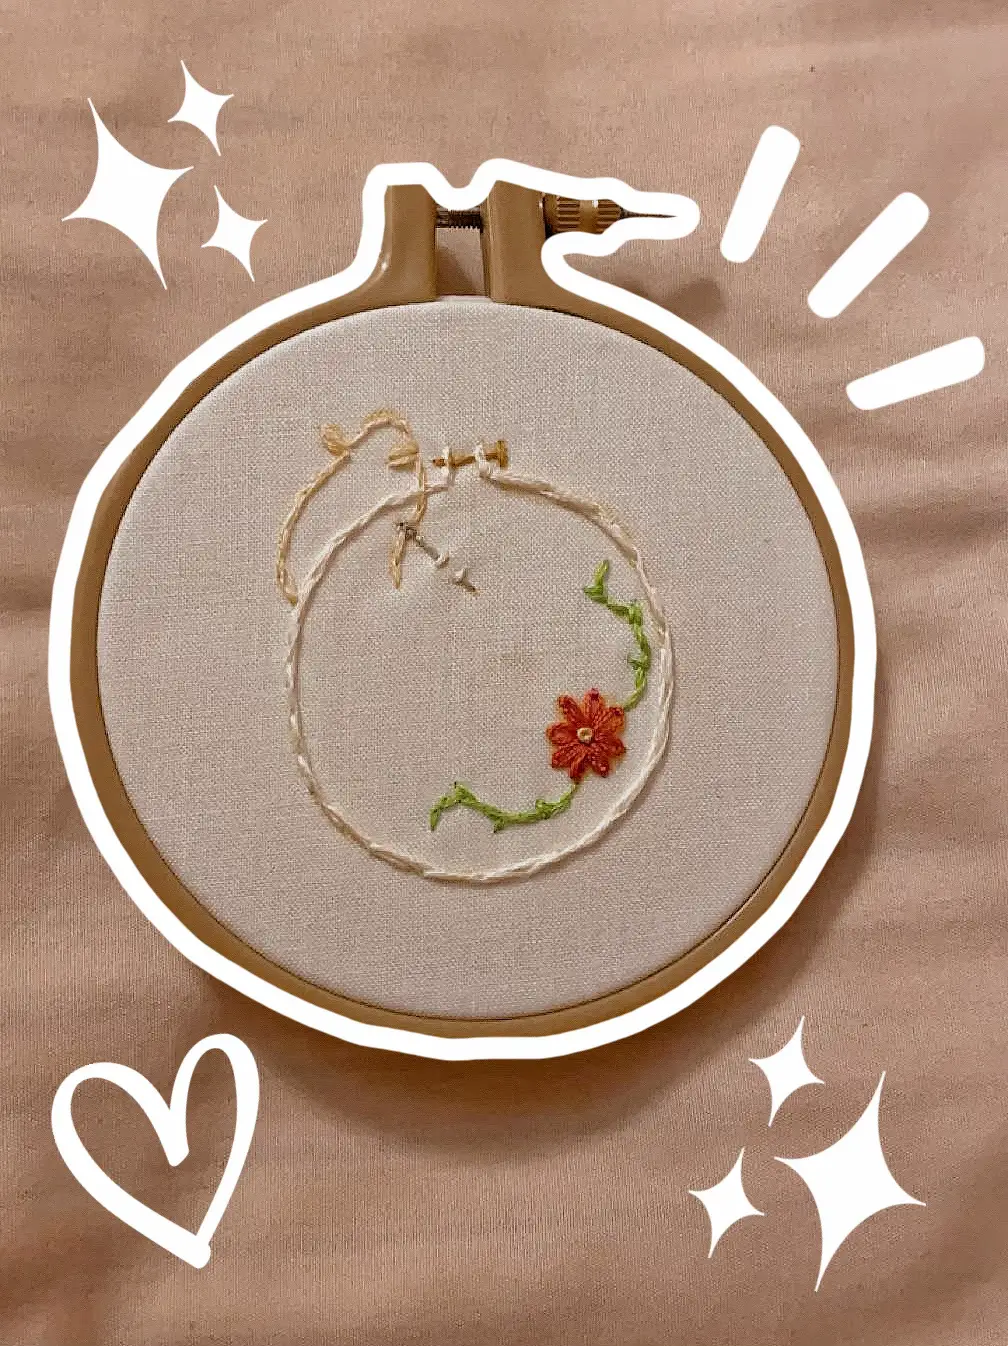 Embroidery Hoop Cost - Lemon8 Search